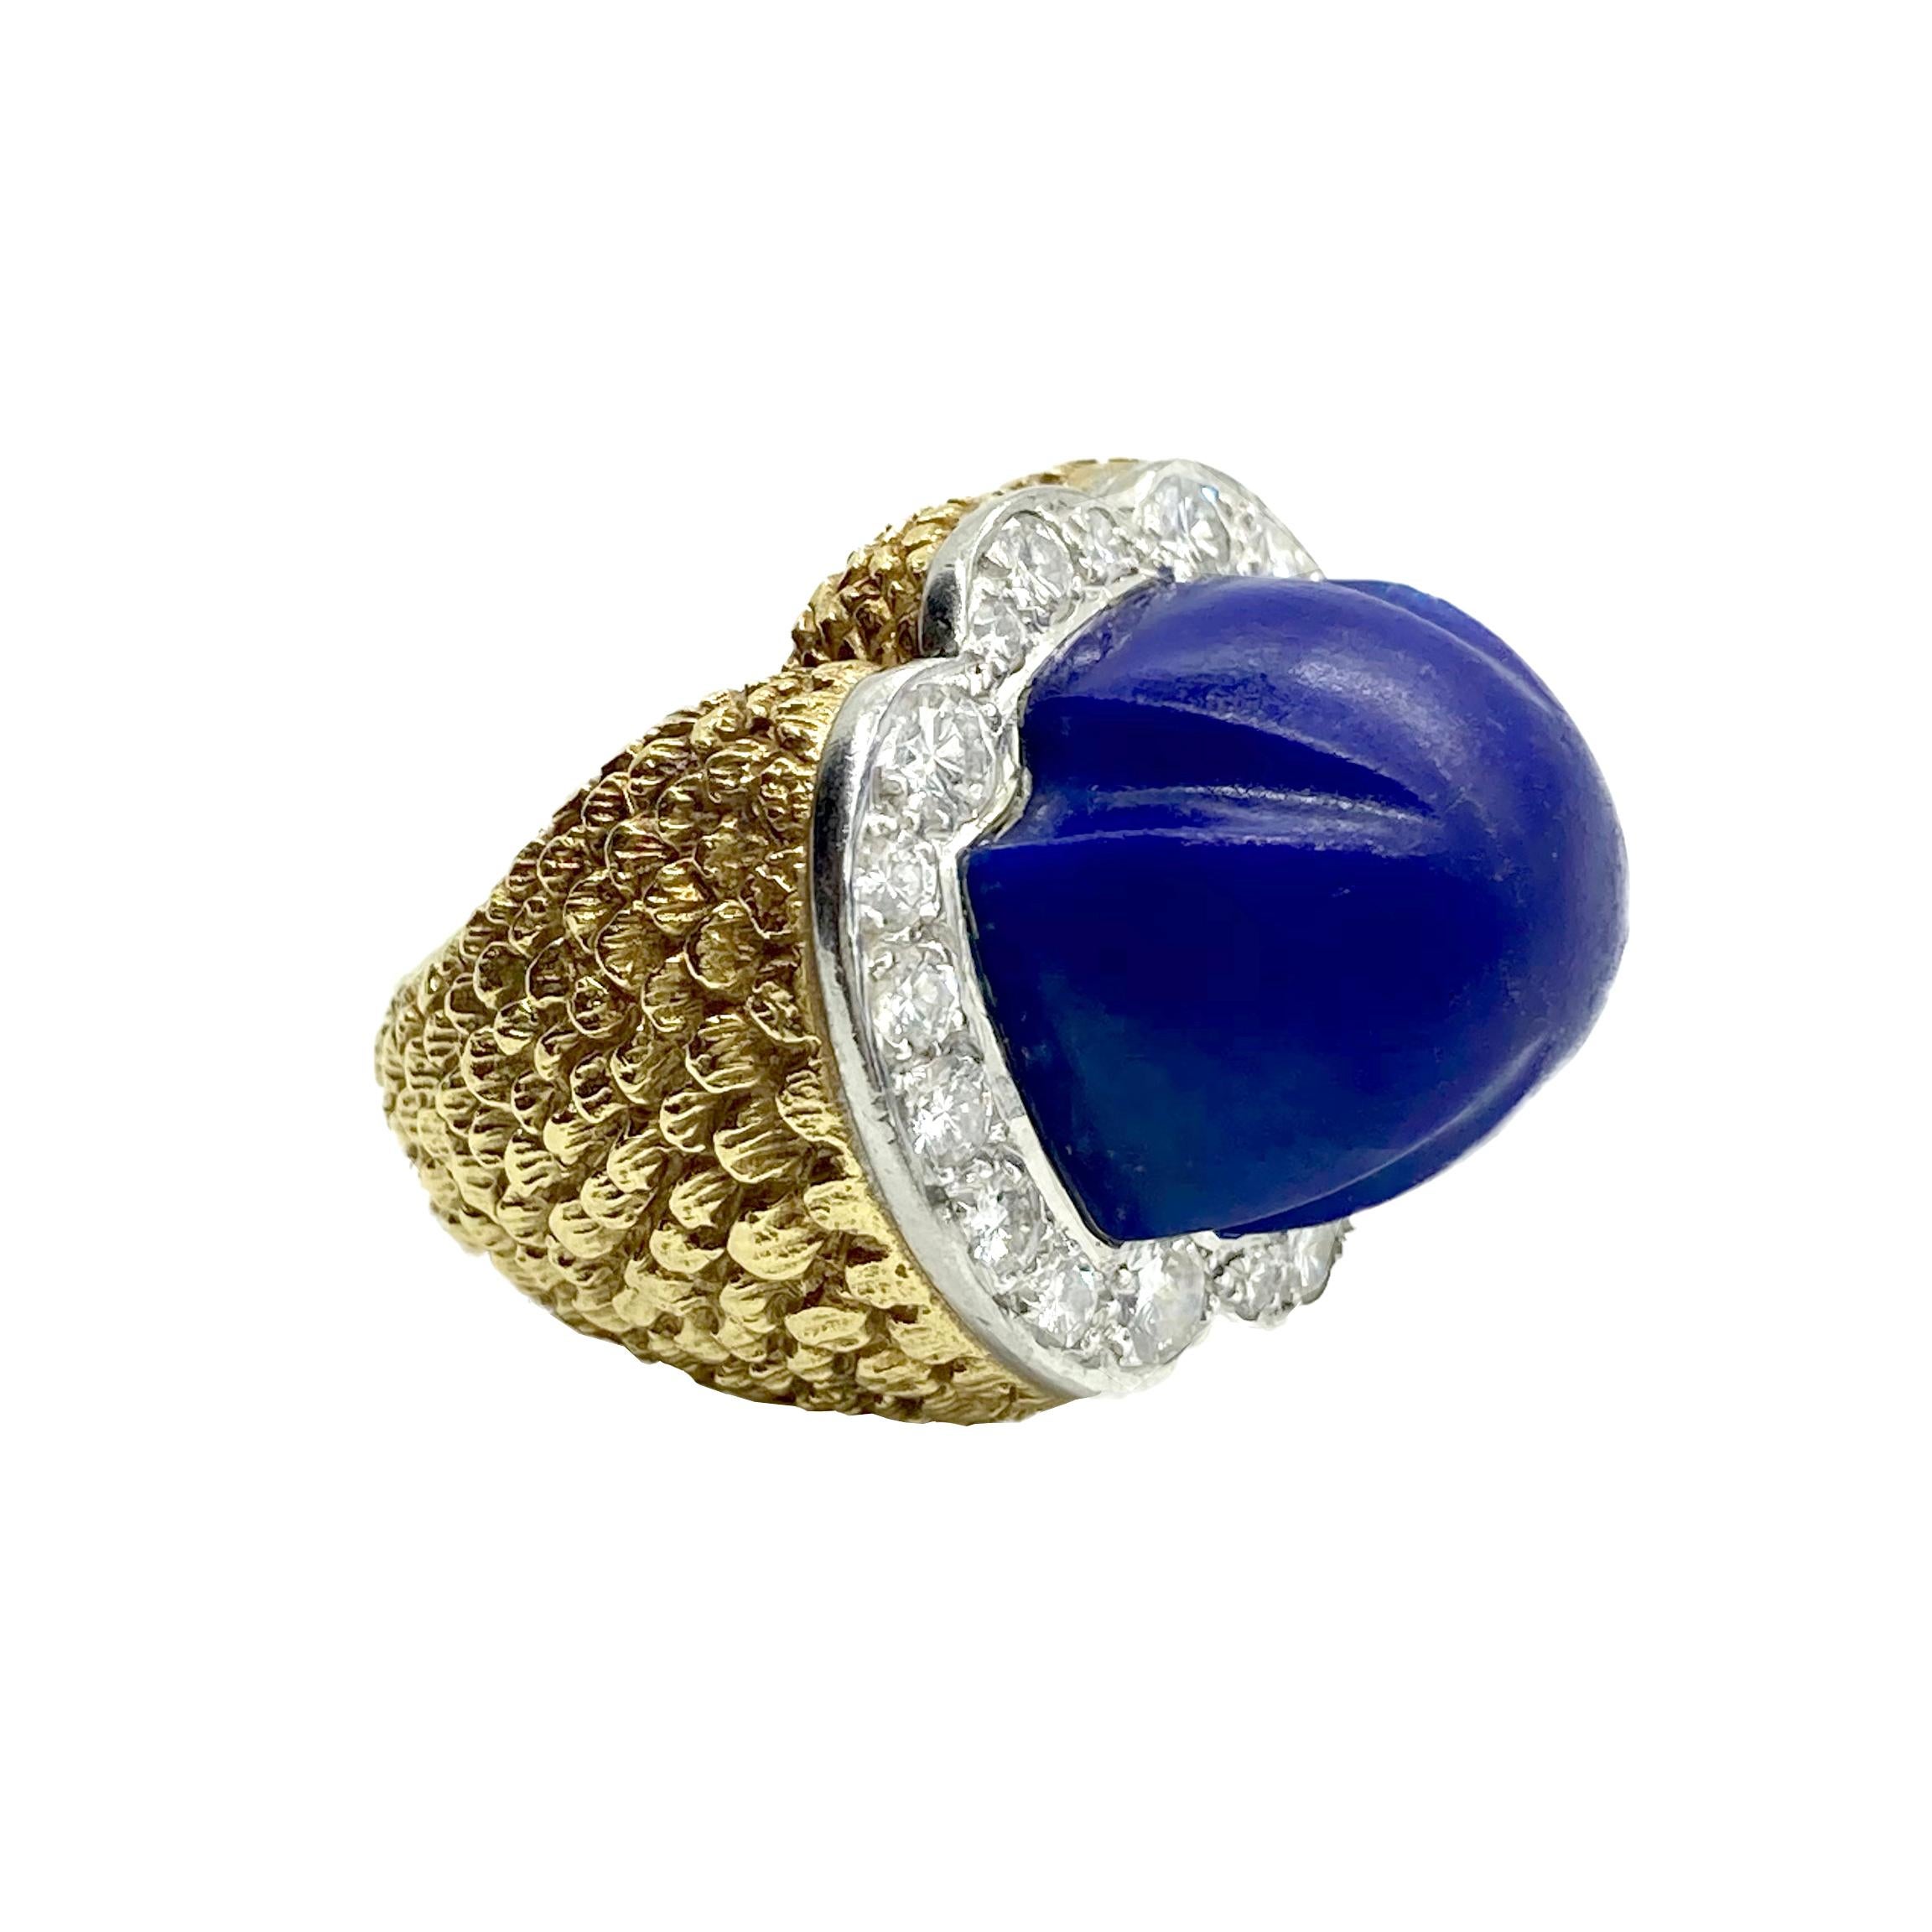 A chic 18 karat yellow gold and platinum ring centering a large lapis bead, embellished with 20 round cut diamonds totaling 1.50 carats. 